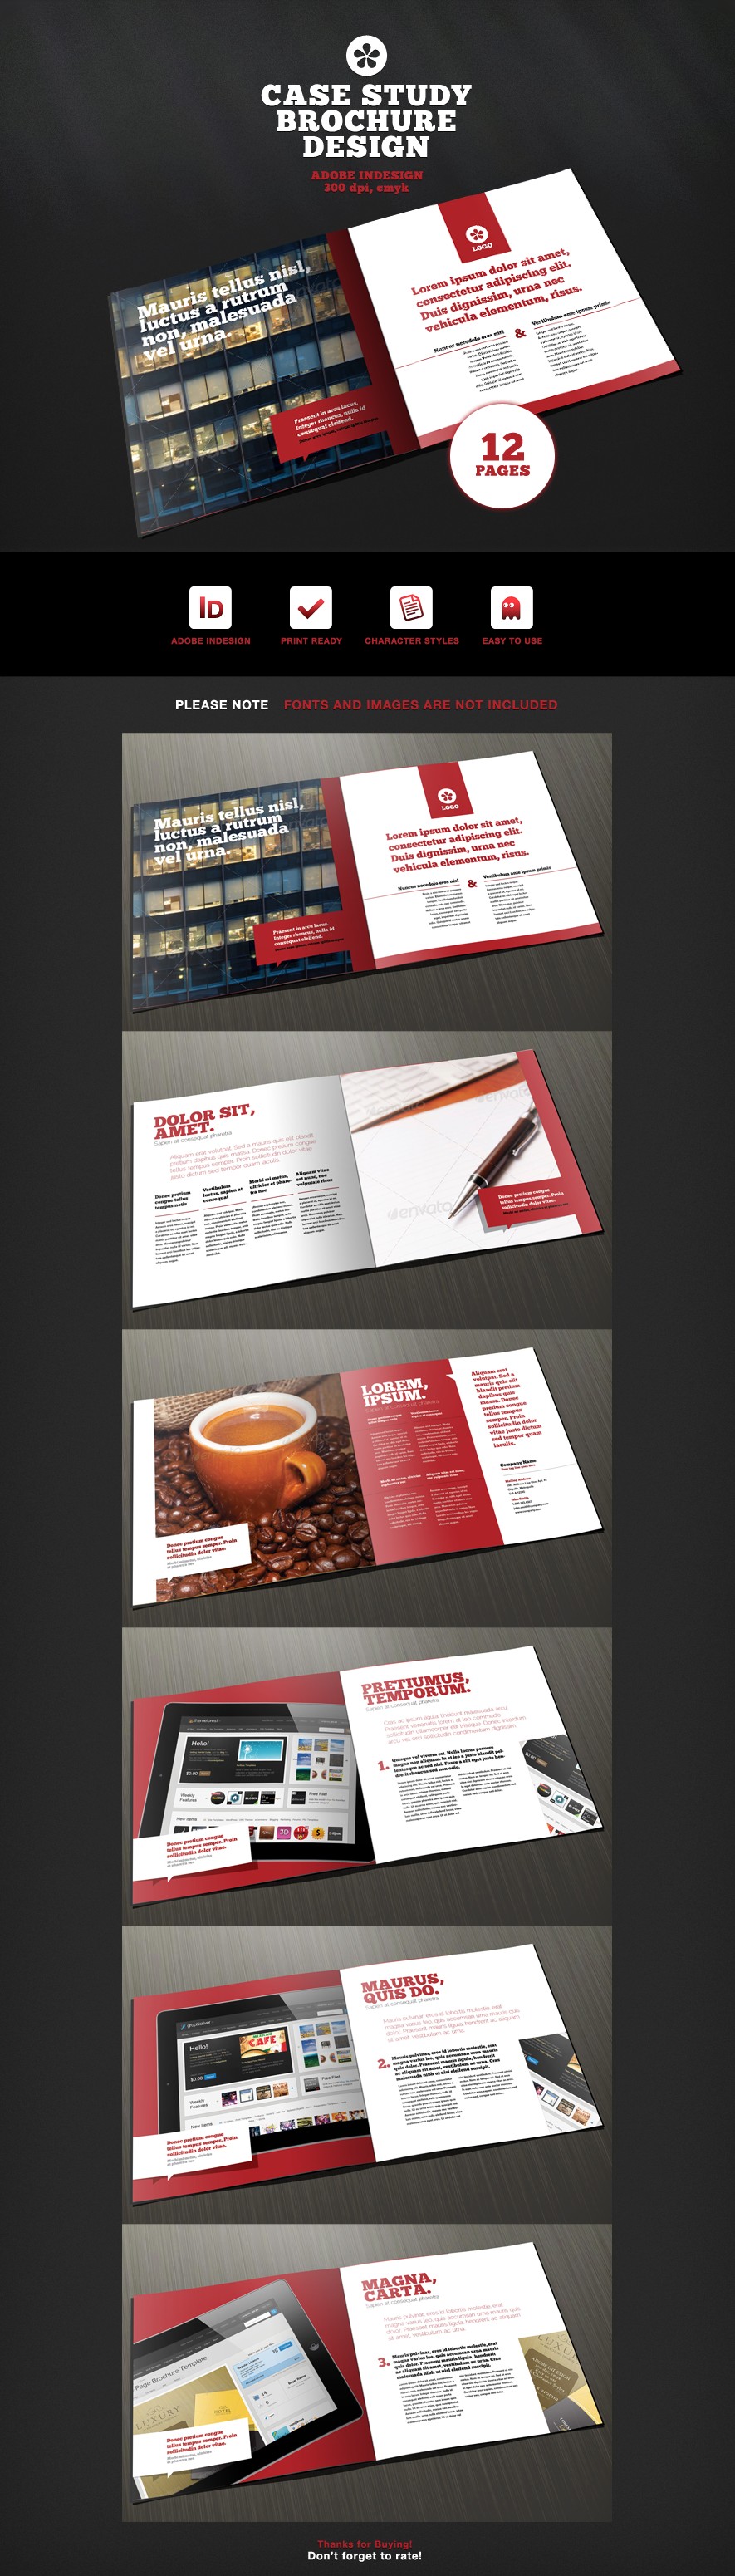 12 Page Case Study Brochure Template By Ramijames On